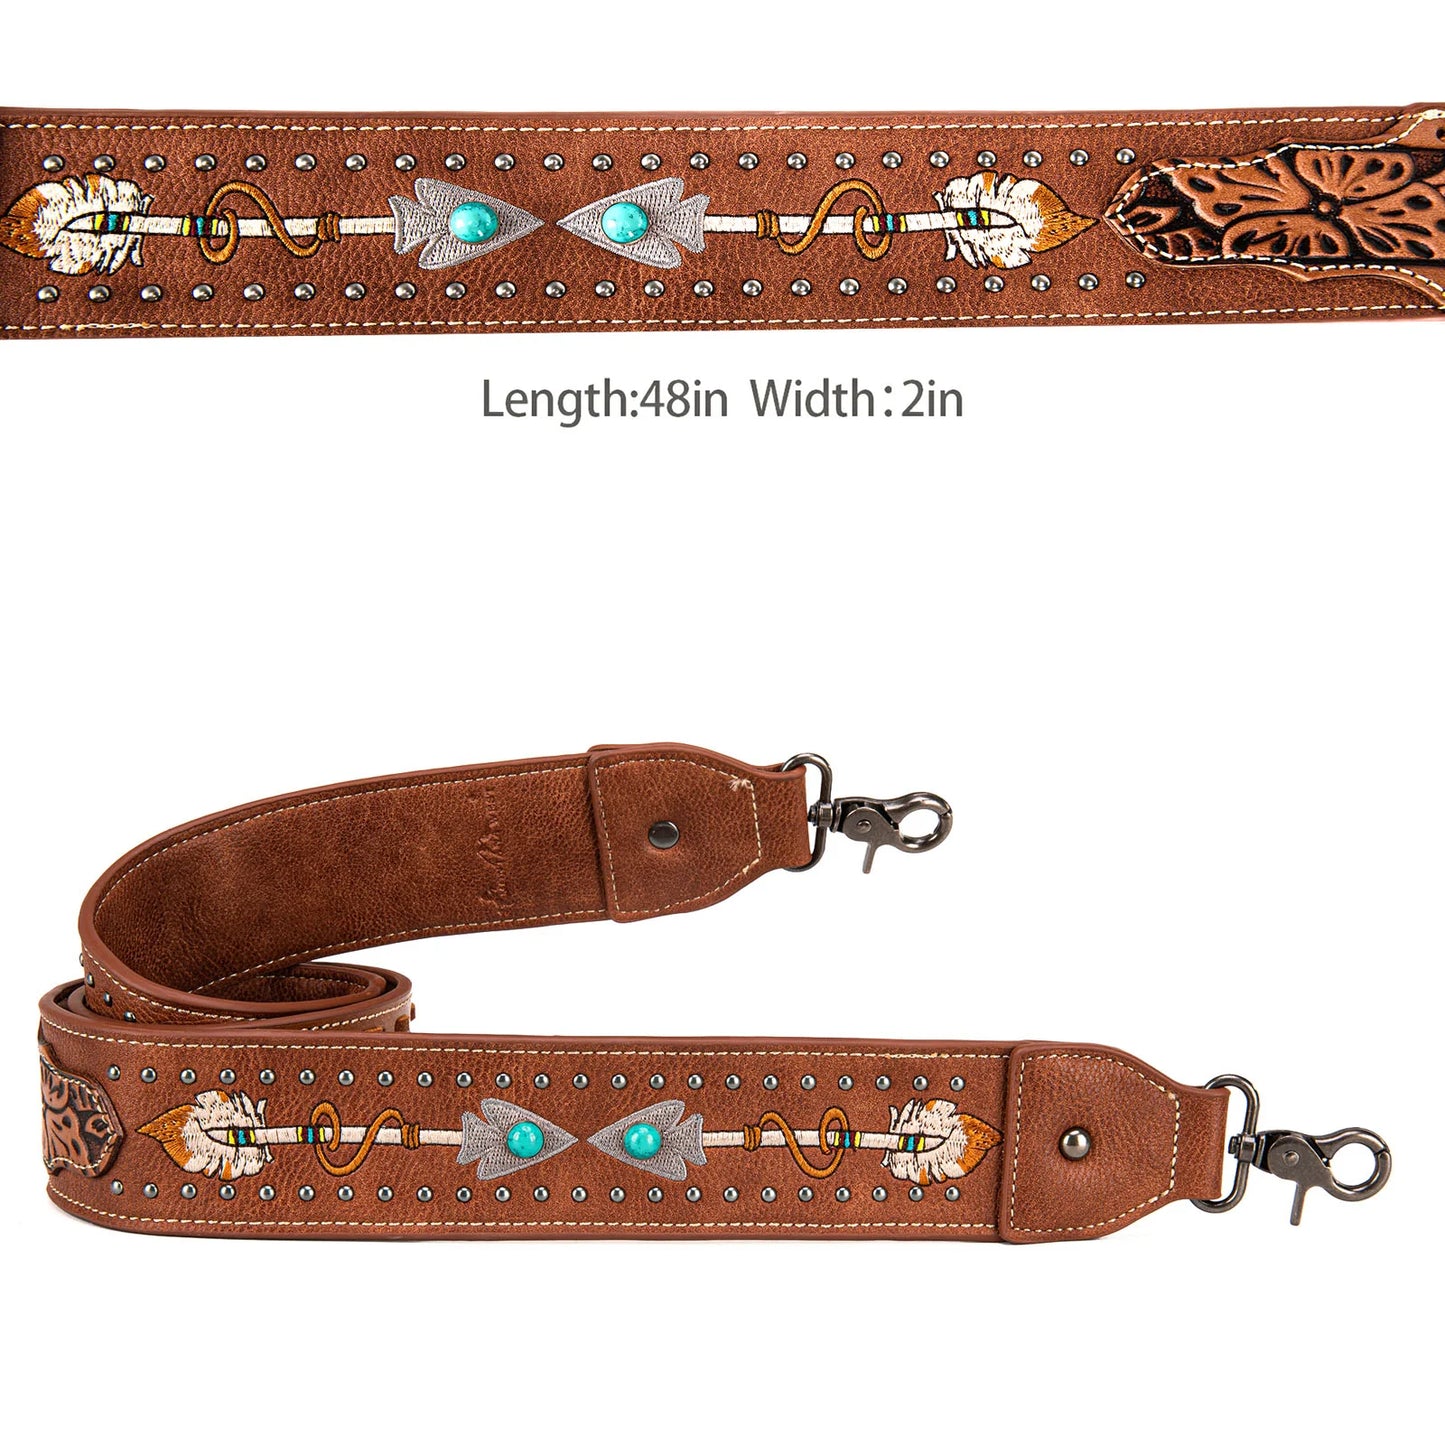 PST1006 - Montana West Western Guitar Style Floral Tooled Arrow" Crossbody Strap - Brown